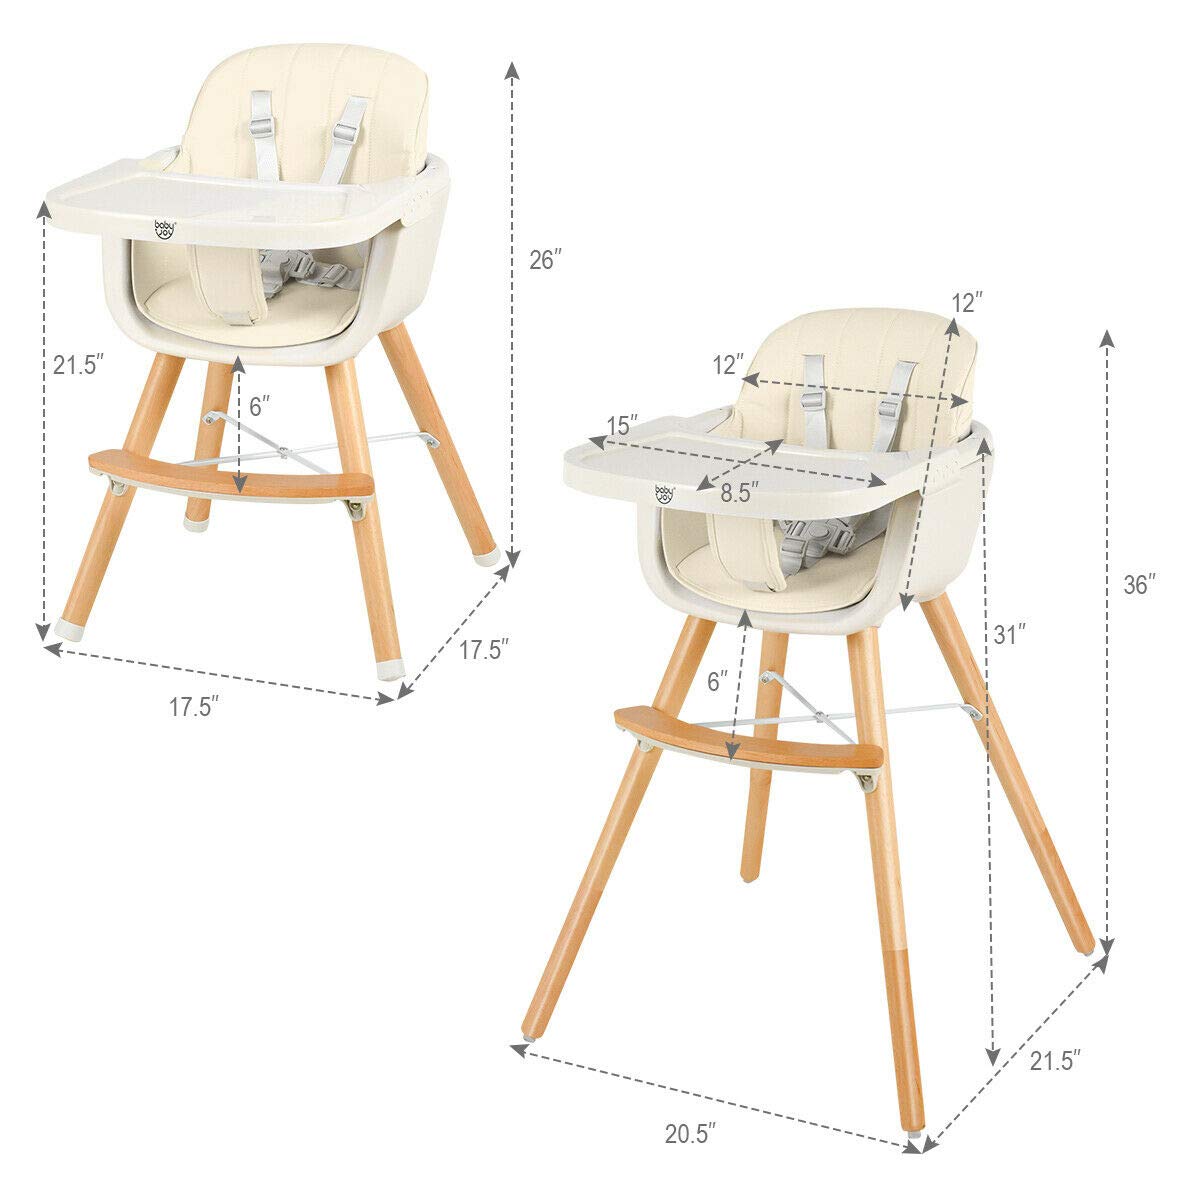 BABY JOY Baby High Chair, Foldable Highchair w/ 7 Heights, 5